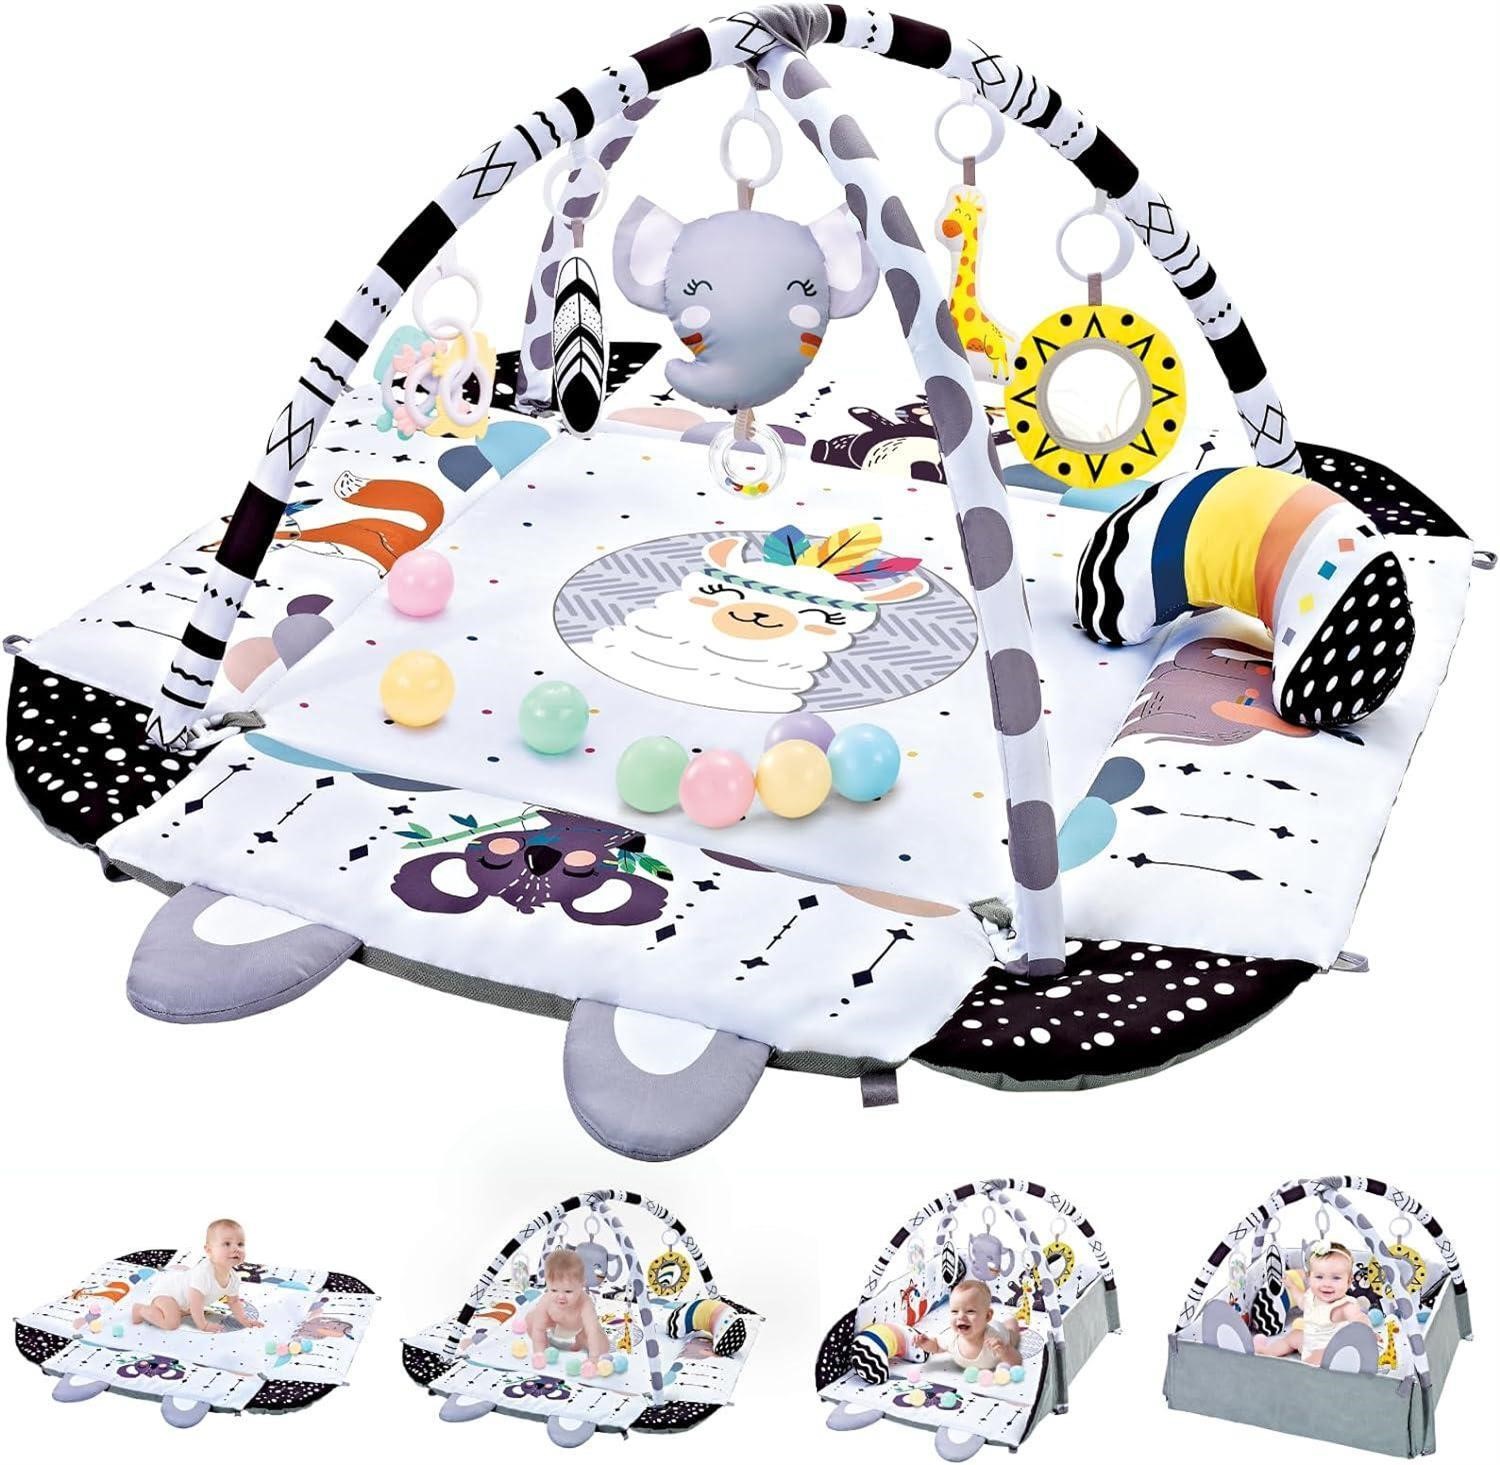 5-in-1 Baby Gym Play Mat & Ball Pit